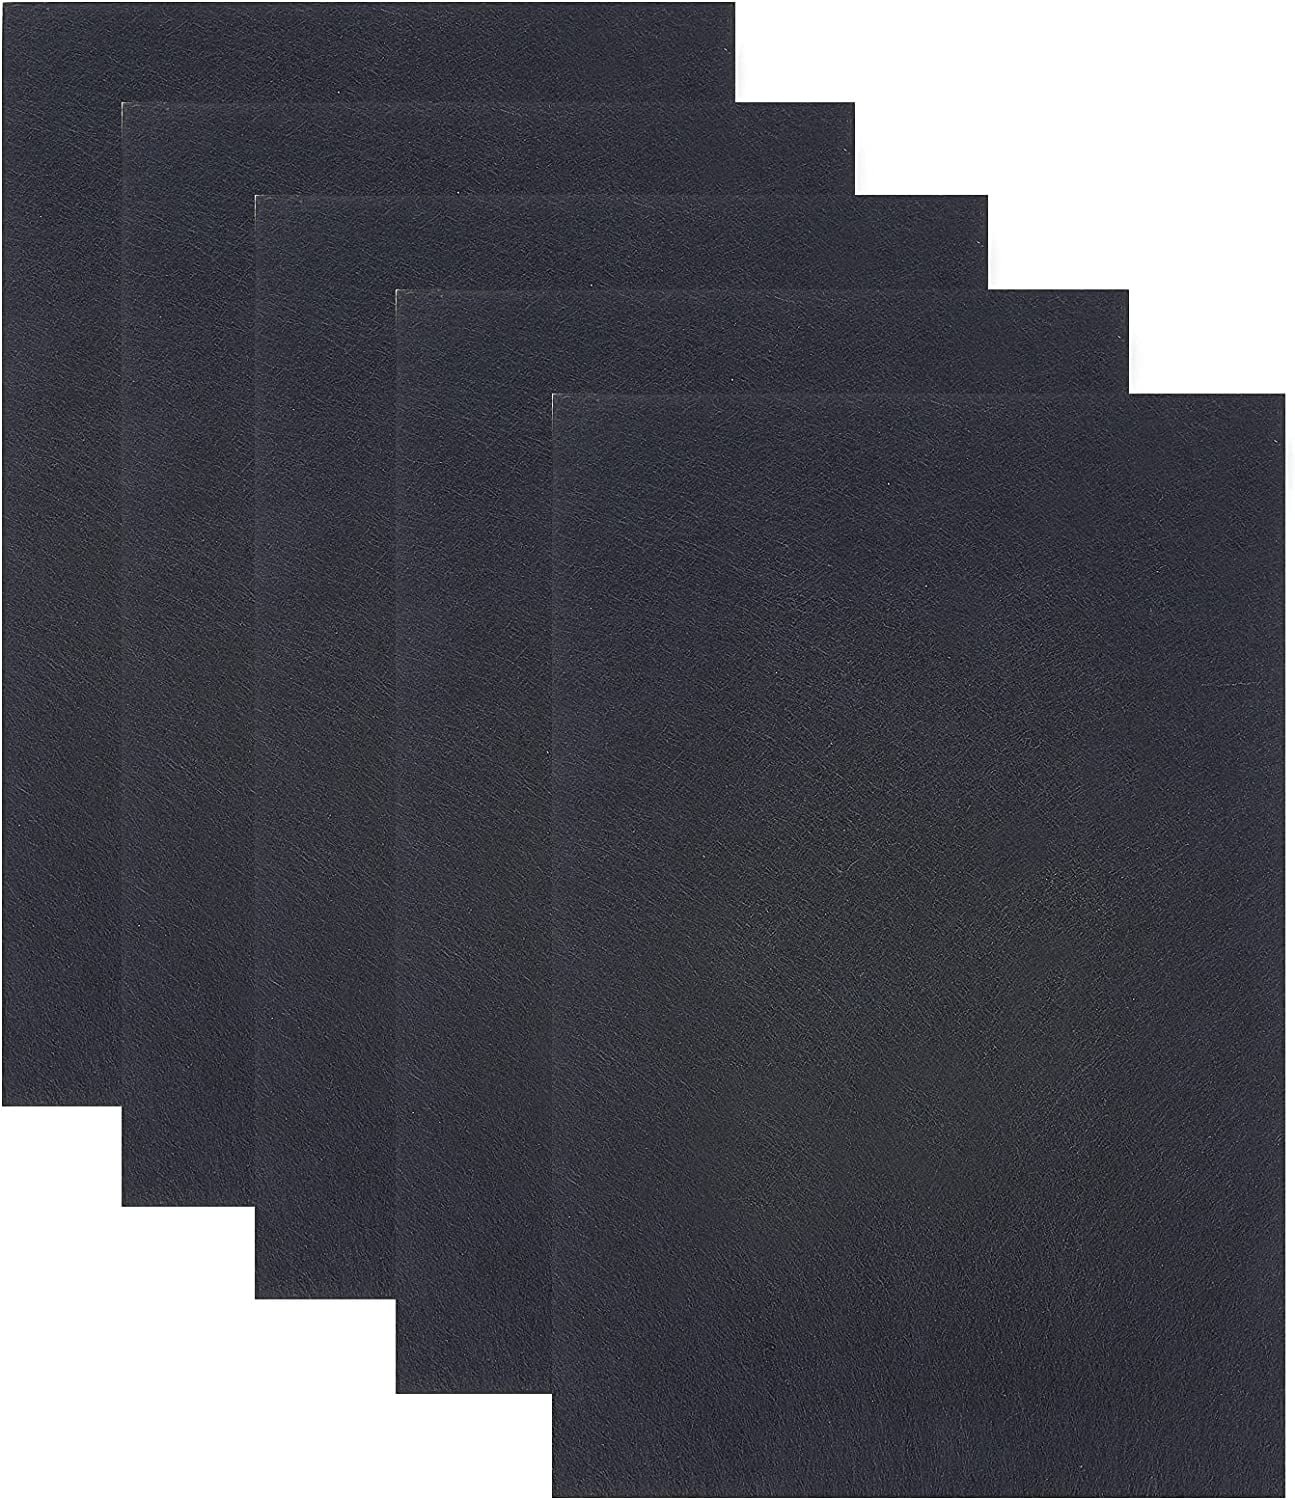 12 WIDE ADHESIVE BACKED FELT- PRICE PER FOOT - PROTECTIVE SOFT